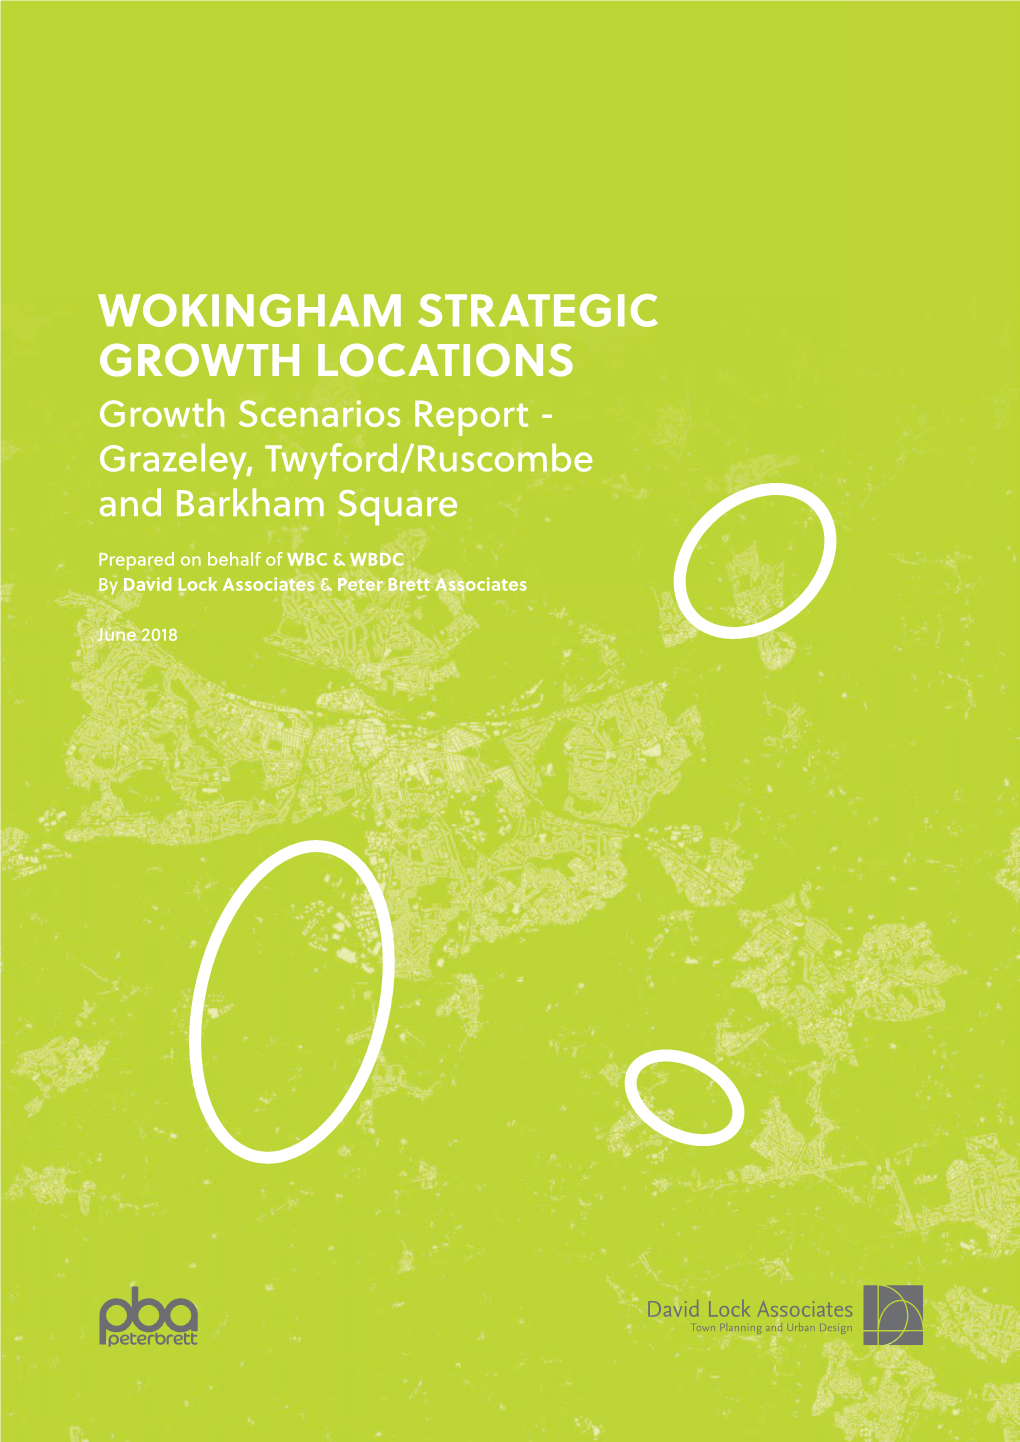 Growth Scenarios Report – Grazeley, Twyford/Ruscombe and Barkham